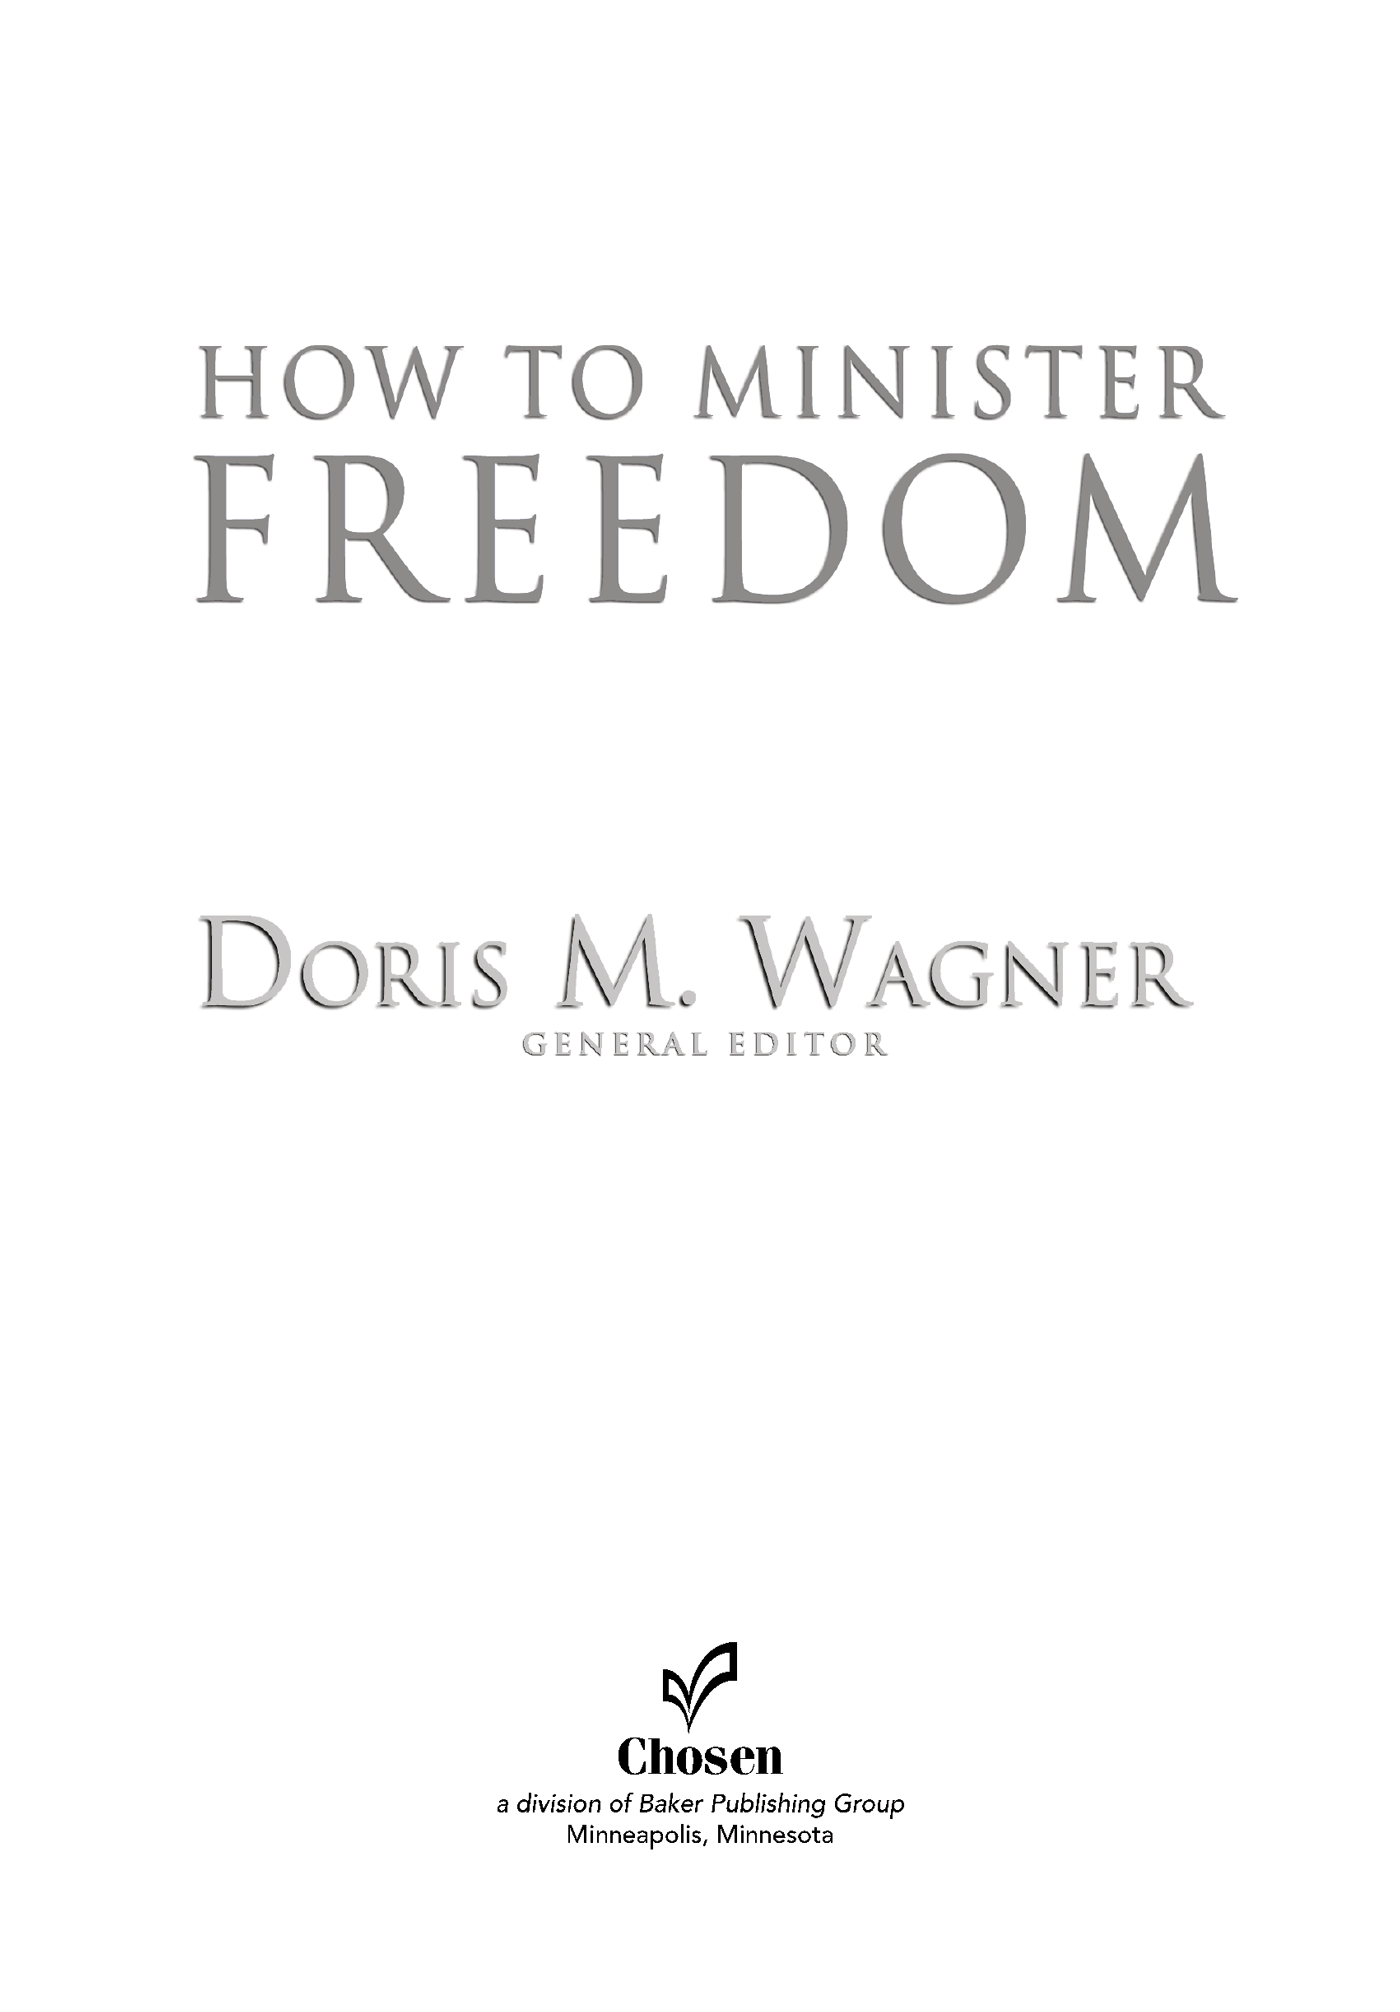 Book 1 Ministering Freedom from Demonic Oppression copyright 2002 Book 2 - photo 1